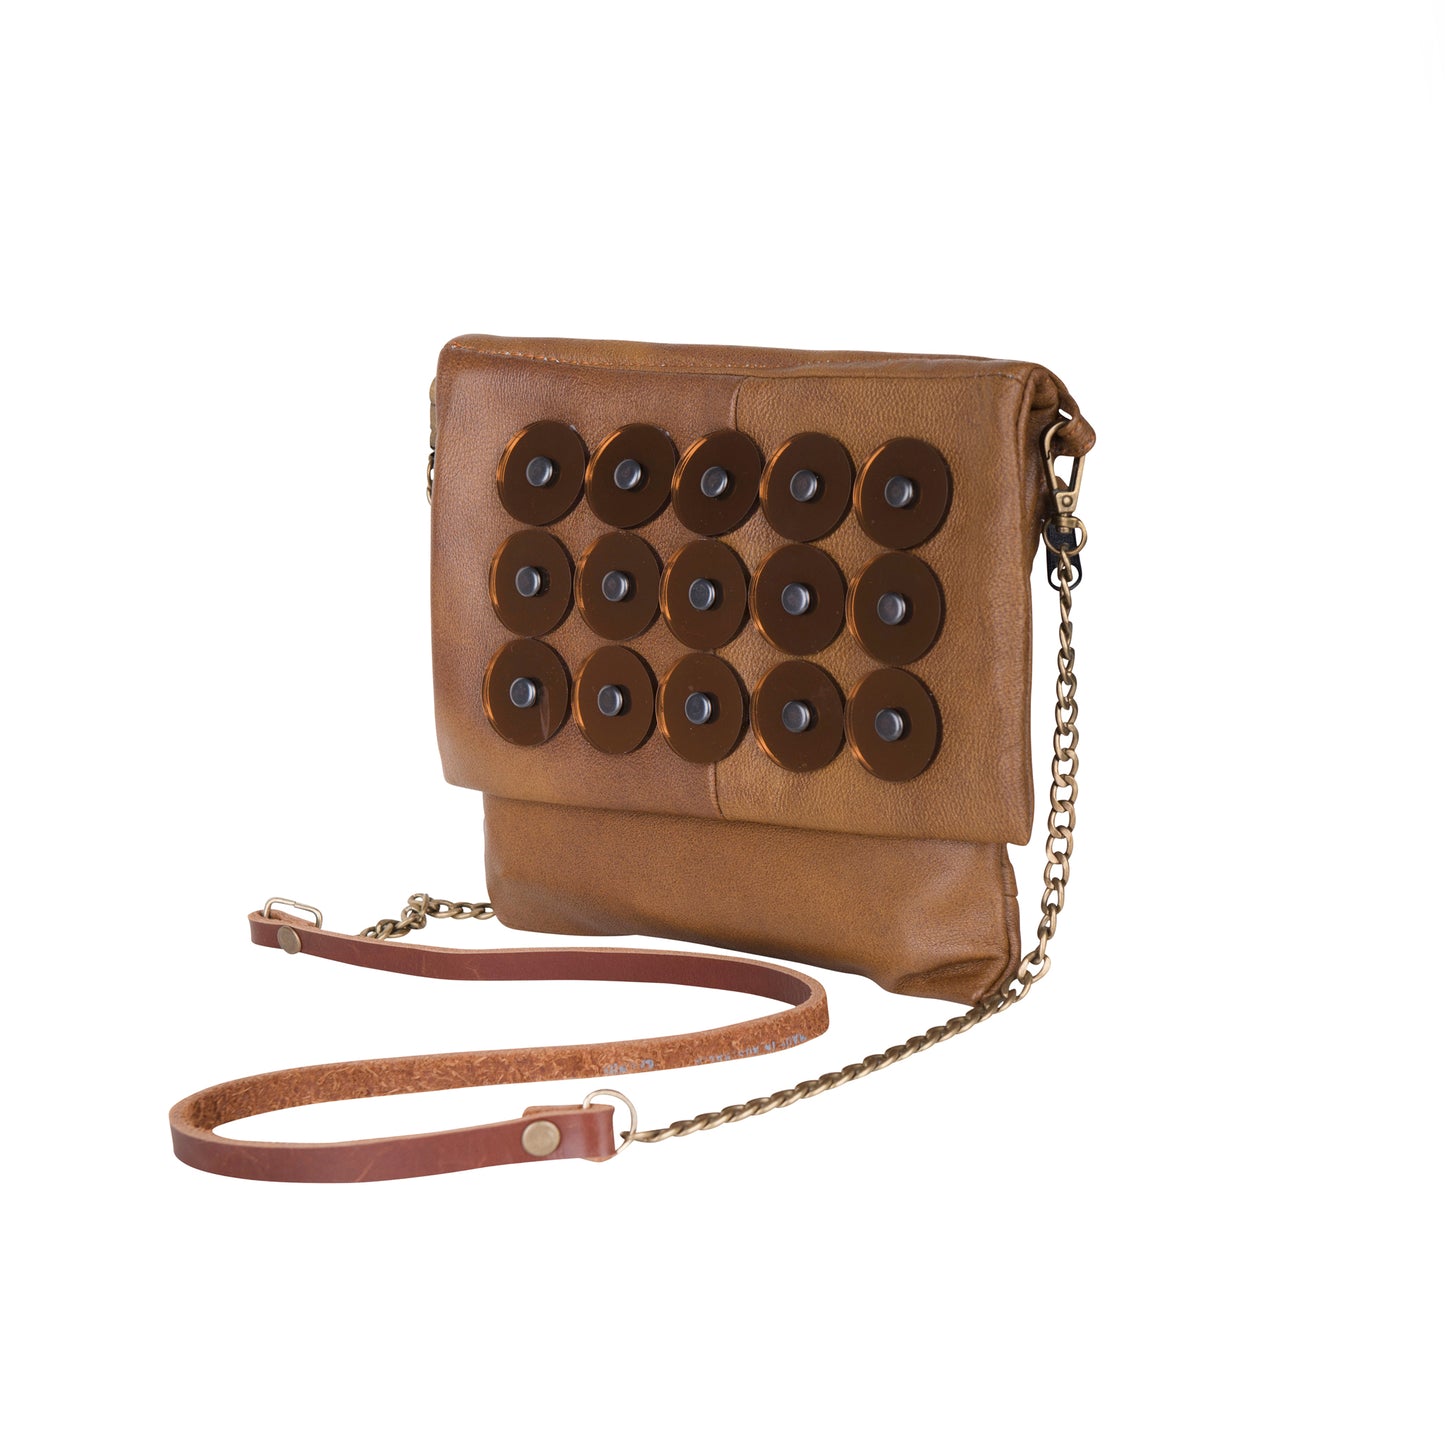 METANoIA tan recycled leather small handbag with circle copper acrylic forms fashioned into a repeative fashion with a smaller circle overlay on each form placed at a sideview.